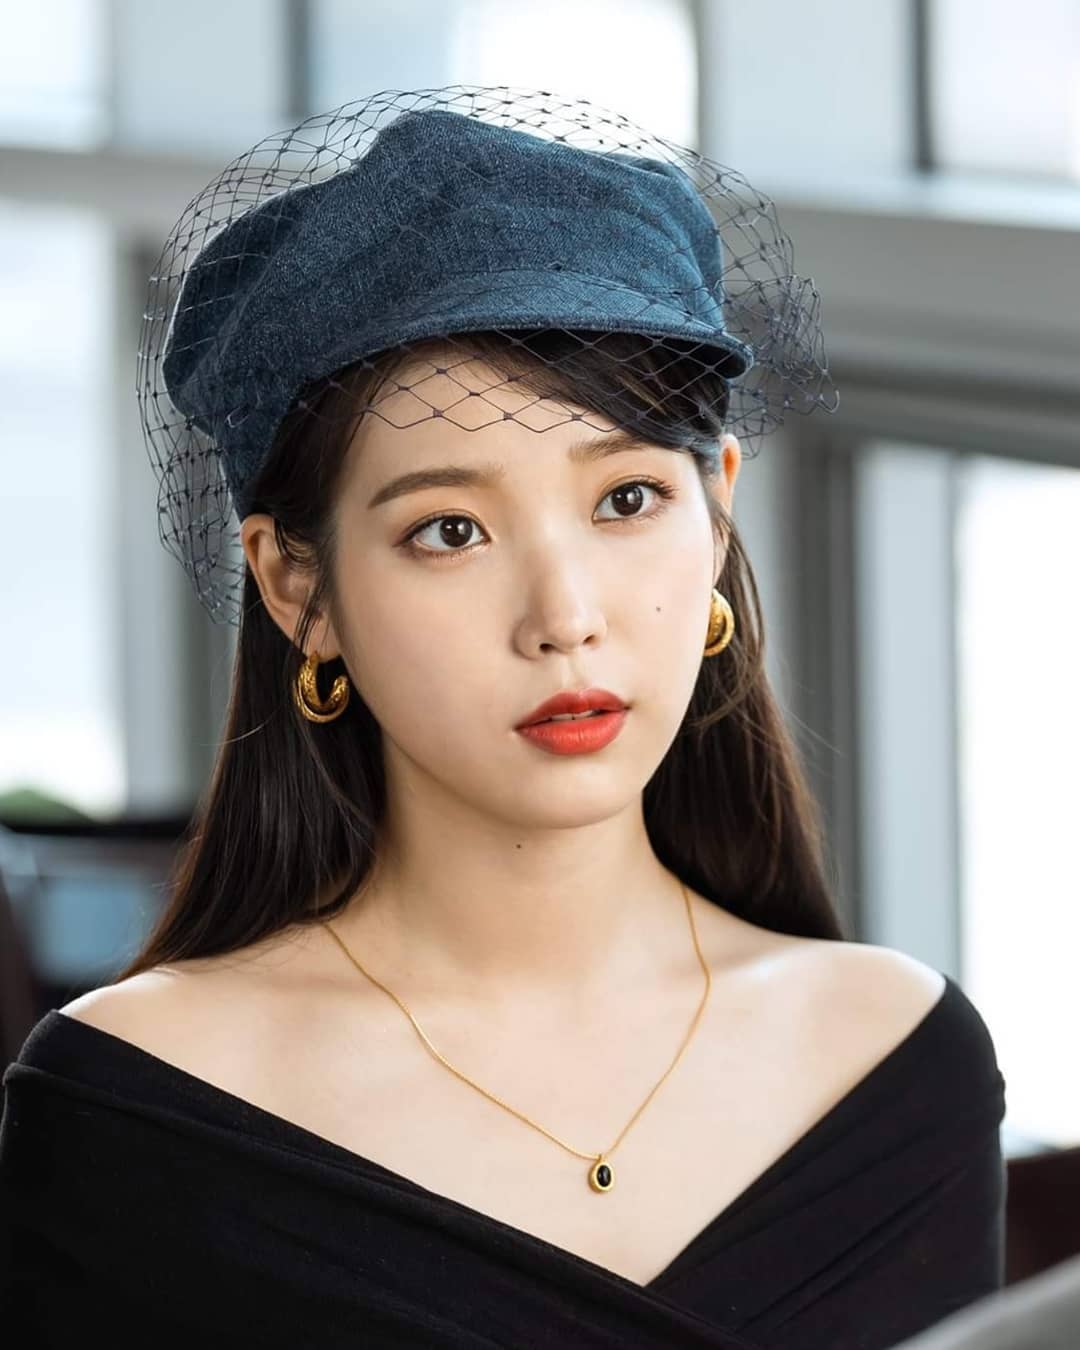 5-actresses-have-the-highest-priority-of-casting-in-2020-son-ye-jin-iu